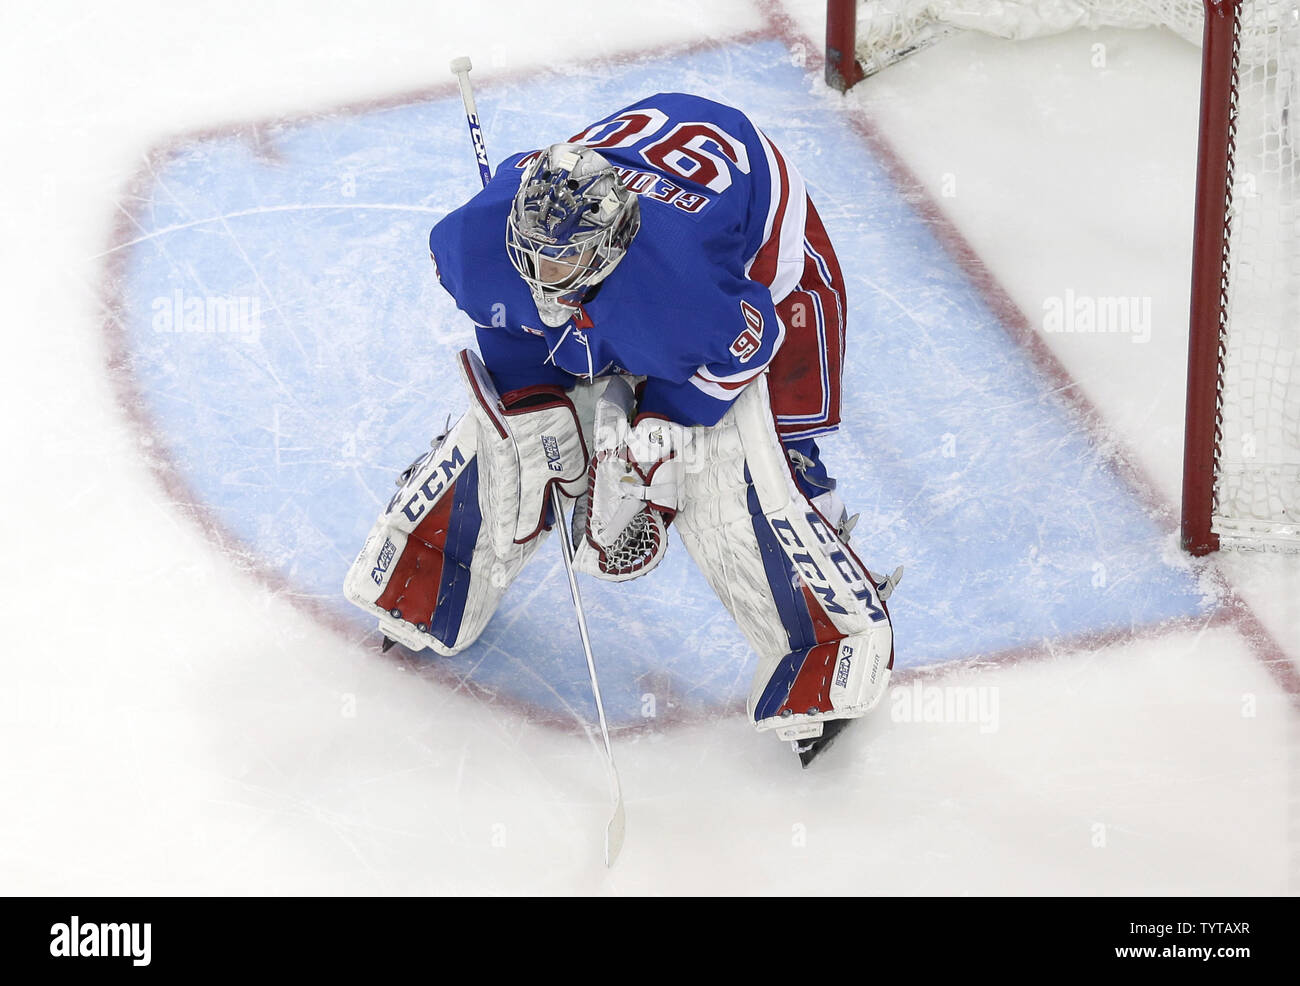 Travis zajac hi-res stock photography and images - Alamy